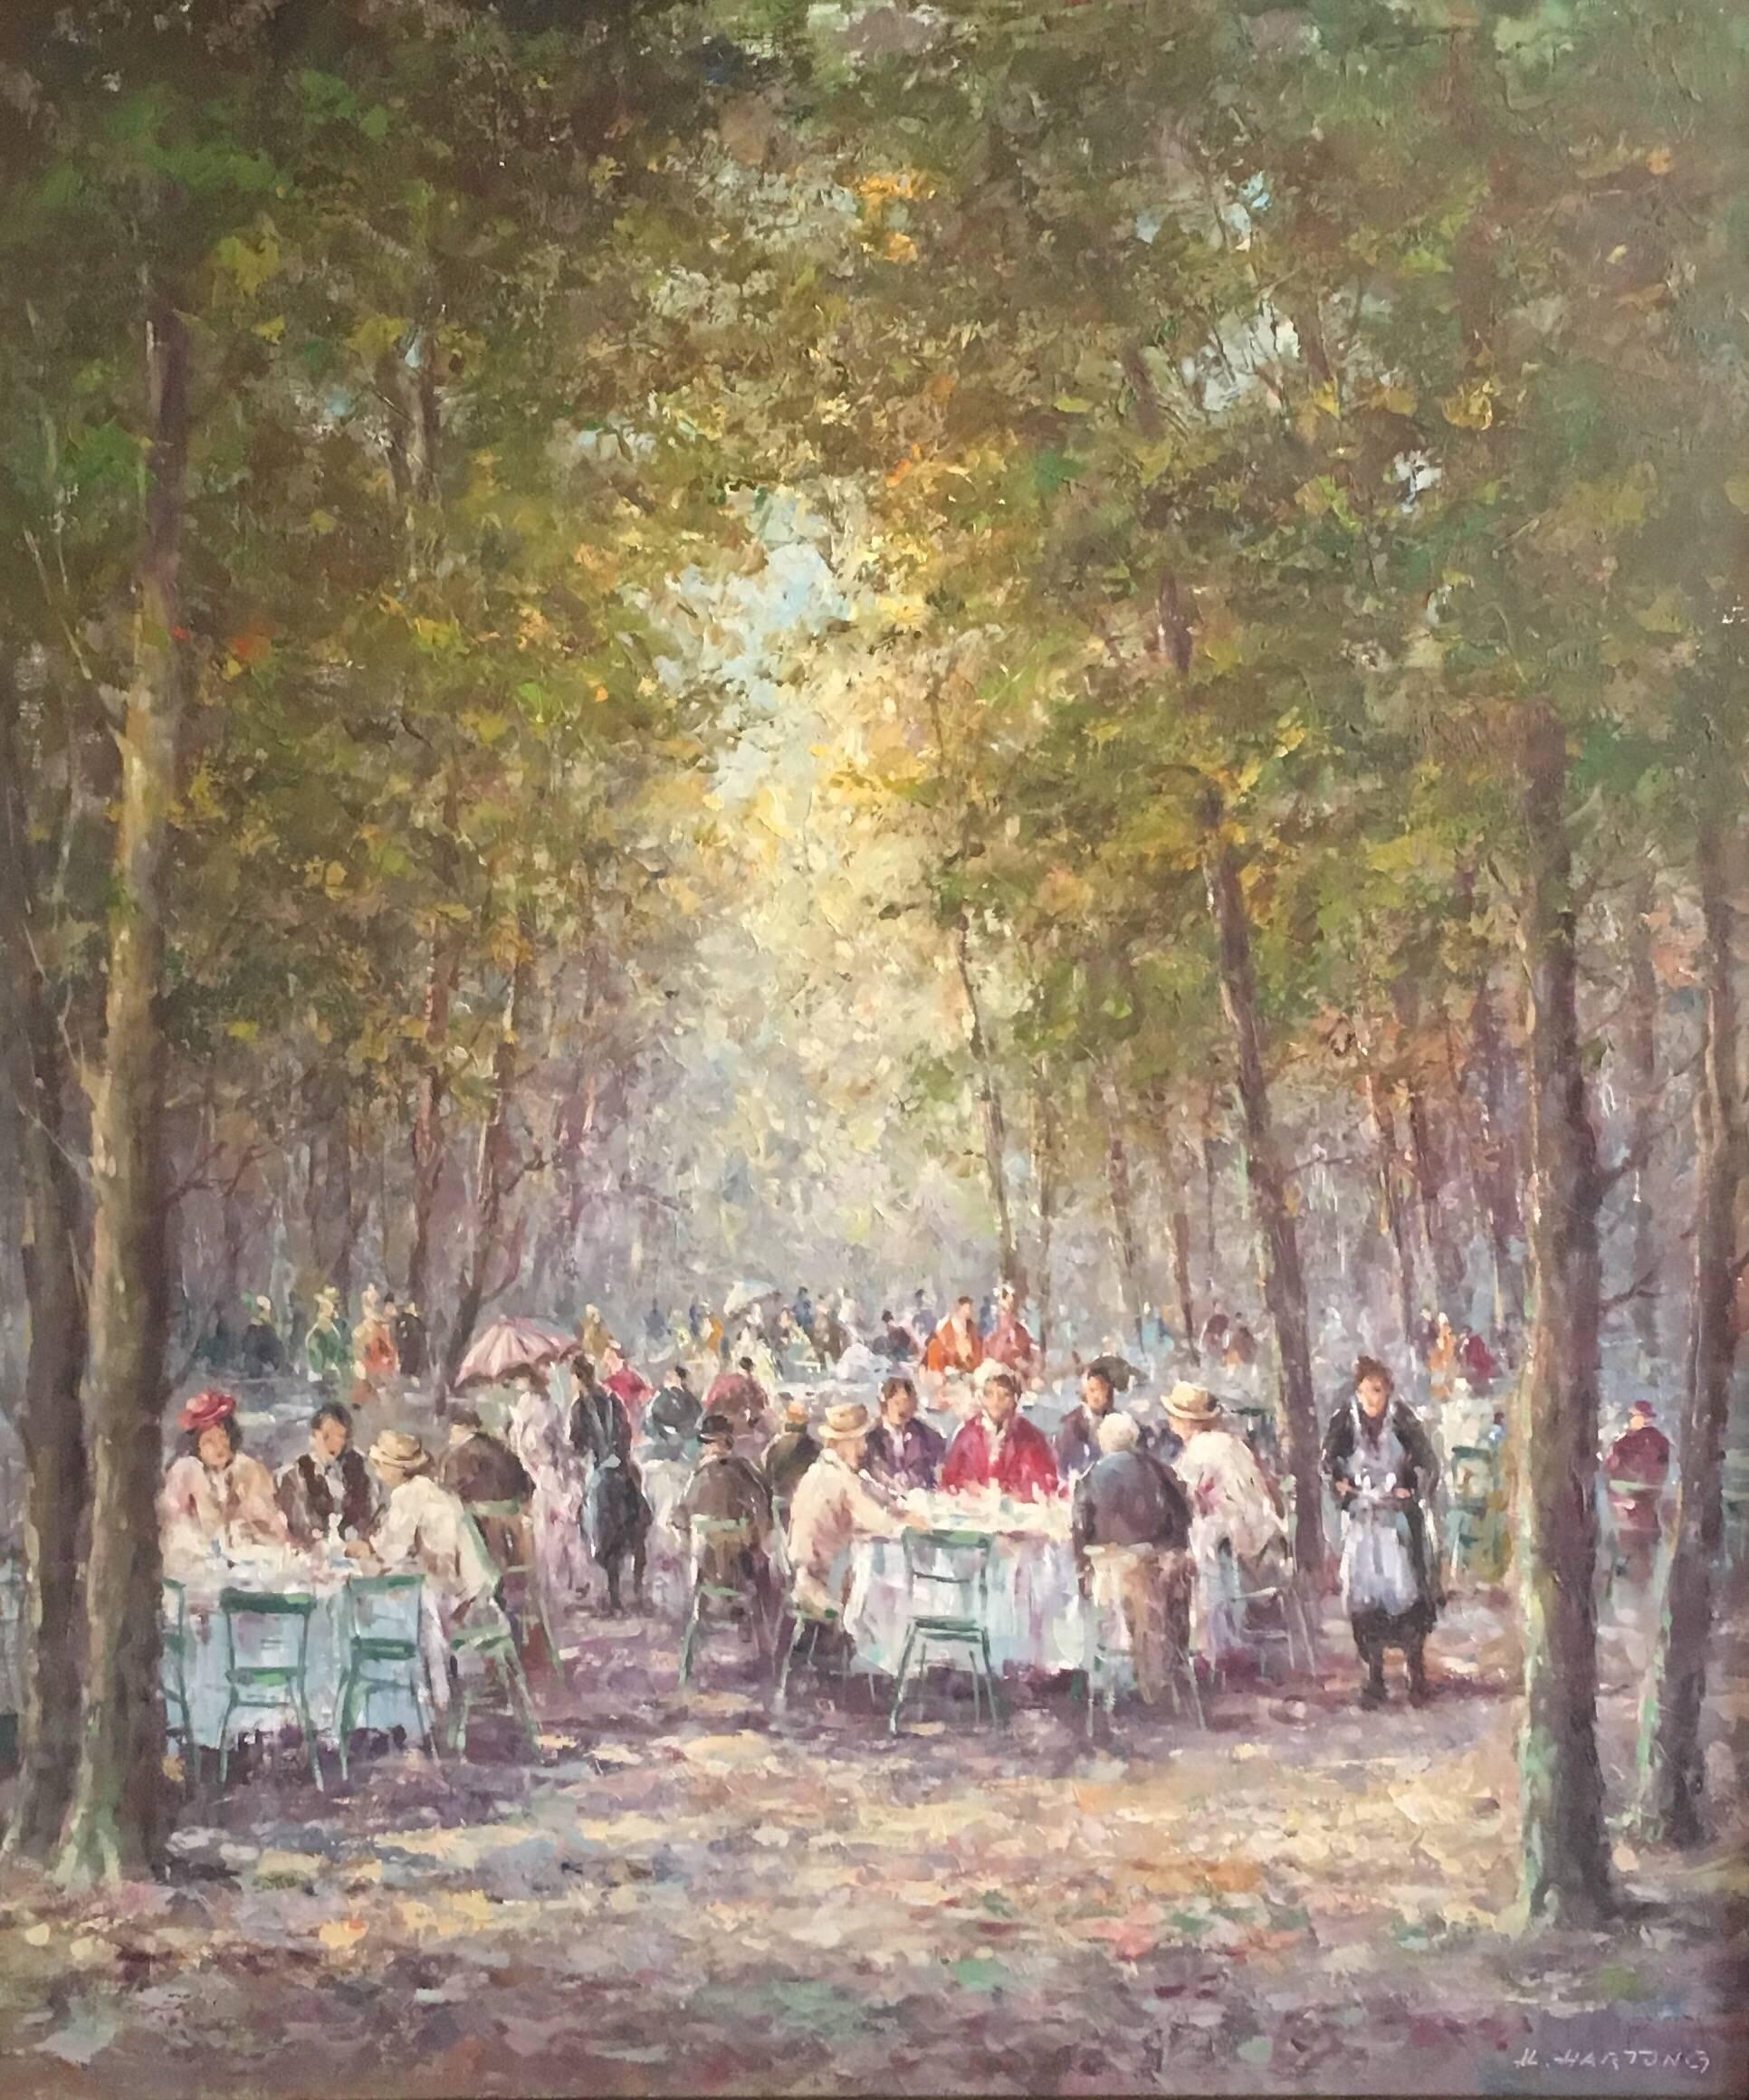 Unknown Landscape Painting - Figures in Busy Park Cafe Scene, Signed Oil Painting